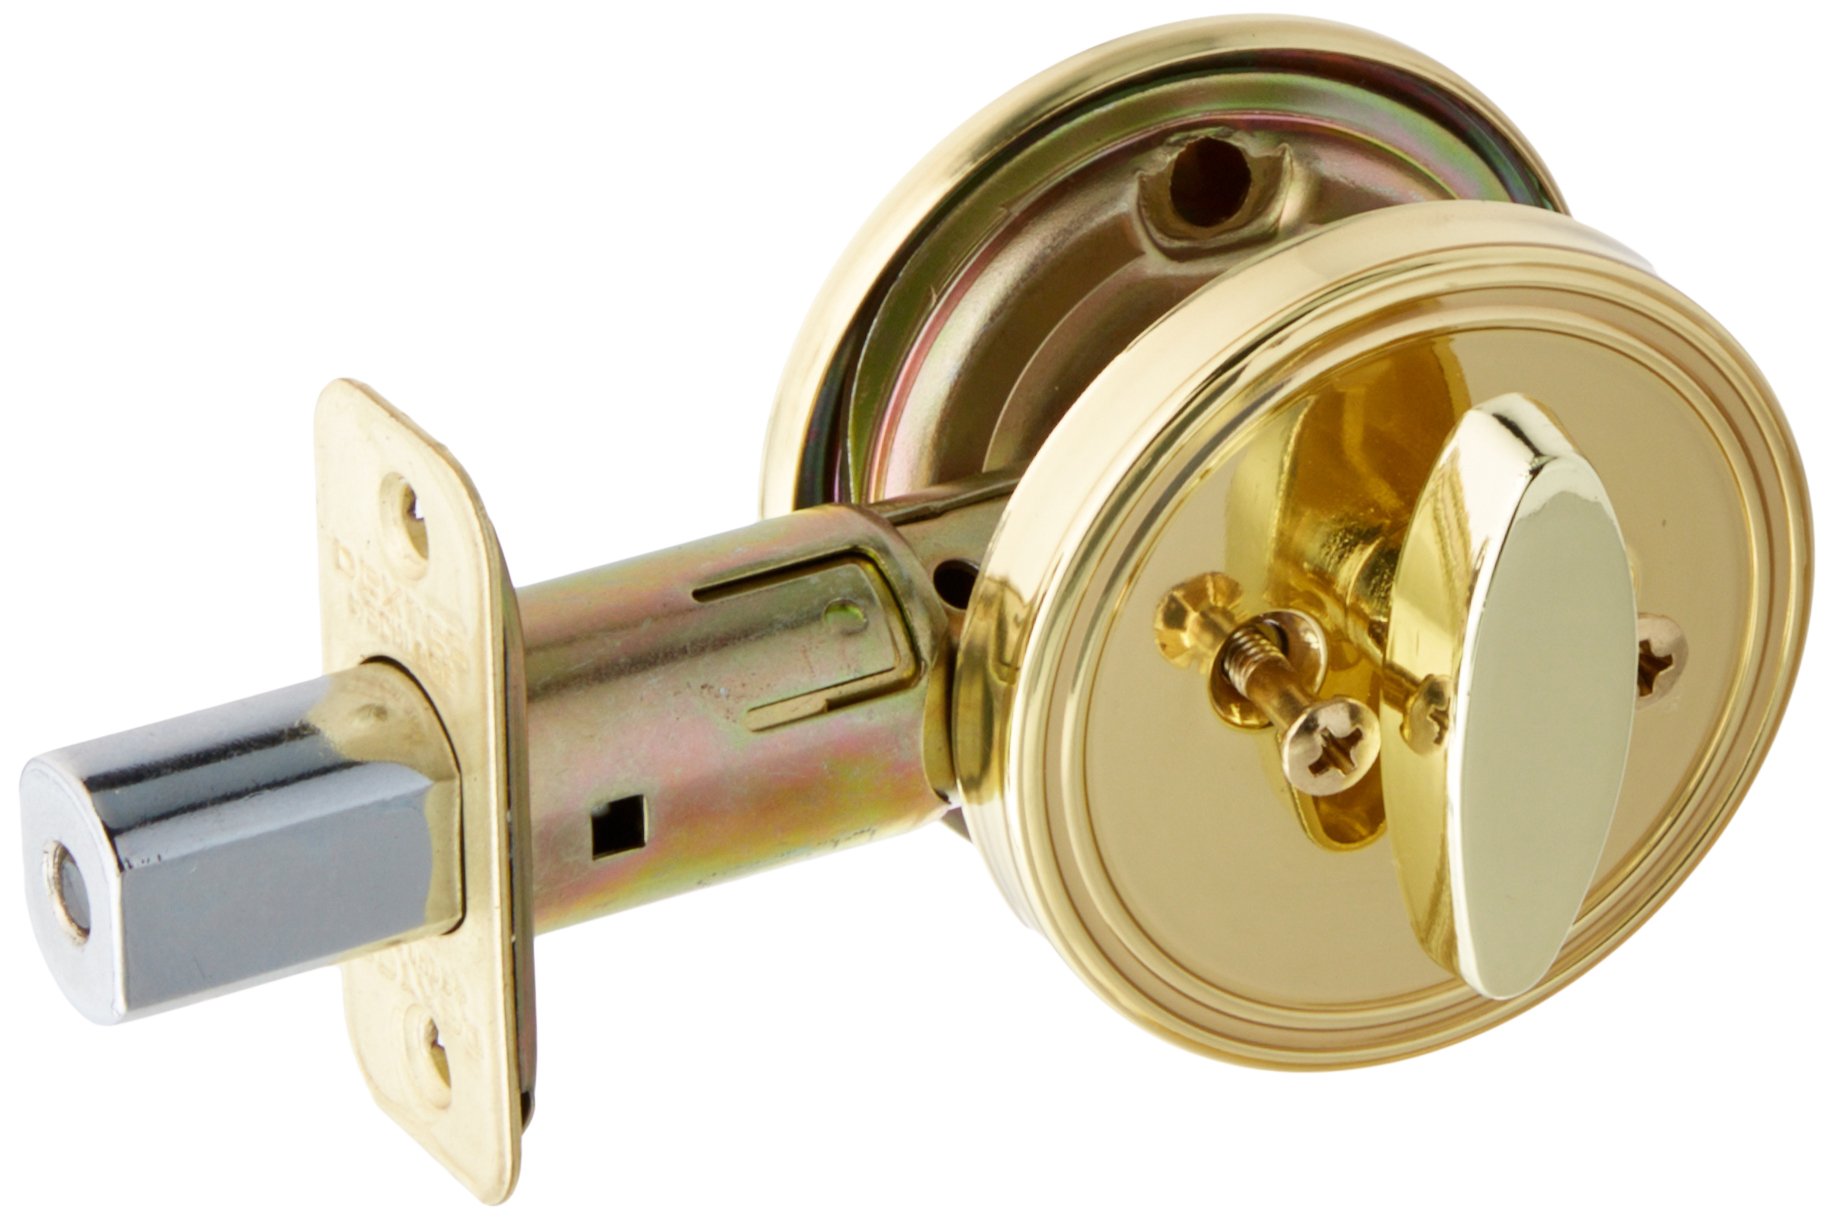 Schlage JD81605 One Sided Deadbolt, Polished Brass $18.73 + Free Shipping w/ Prime or on $35+